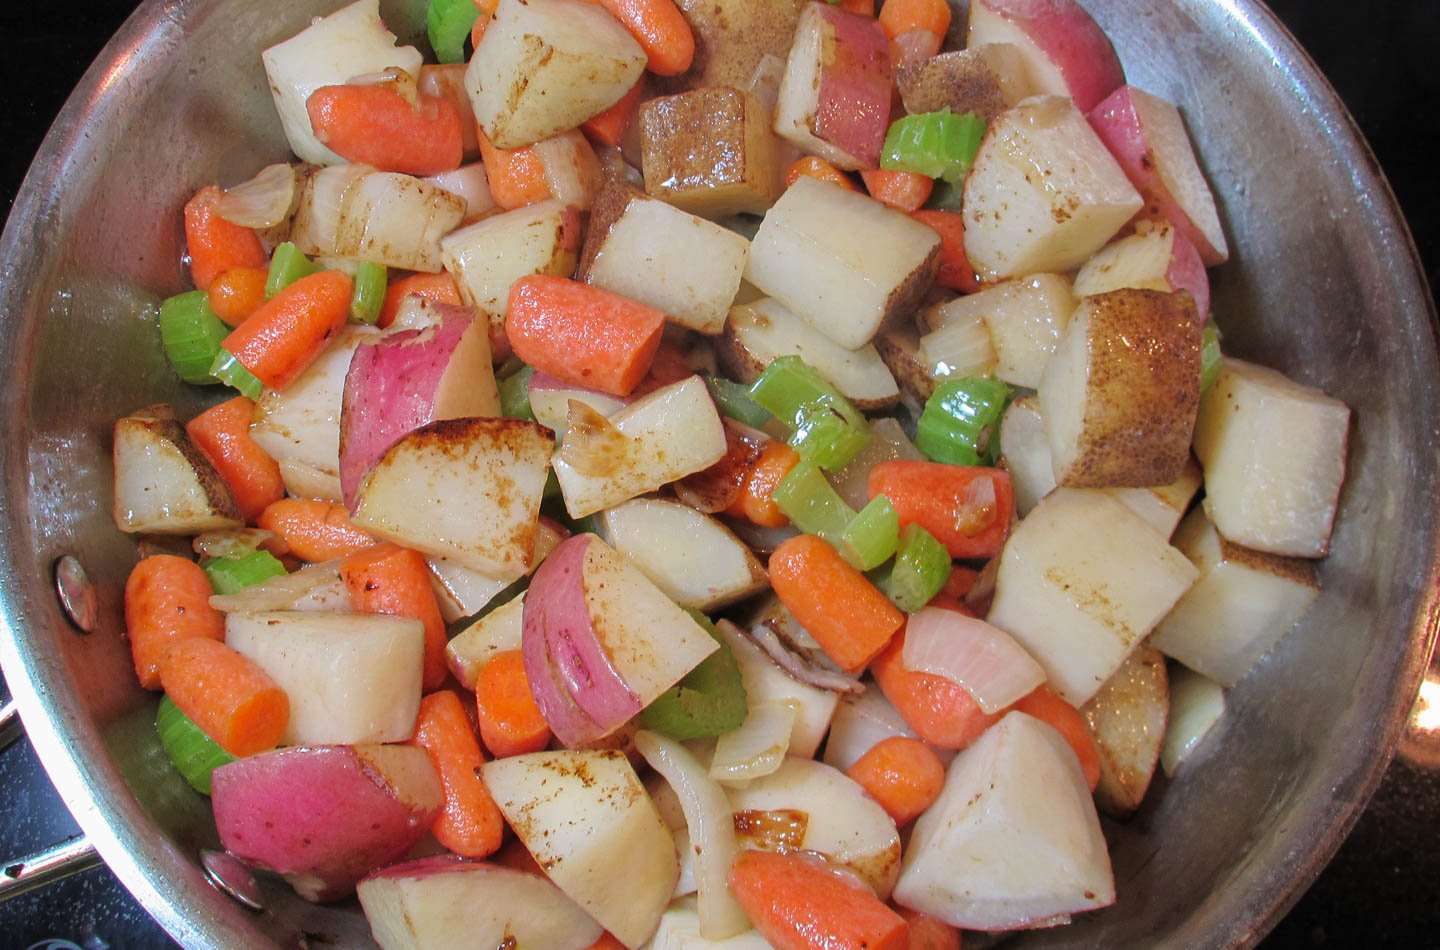 Potatoes, carrots, celery and onions searing in stainless steel skillet.